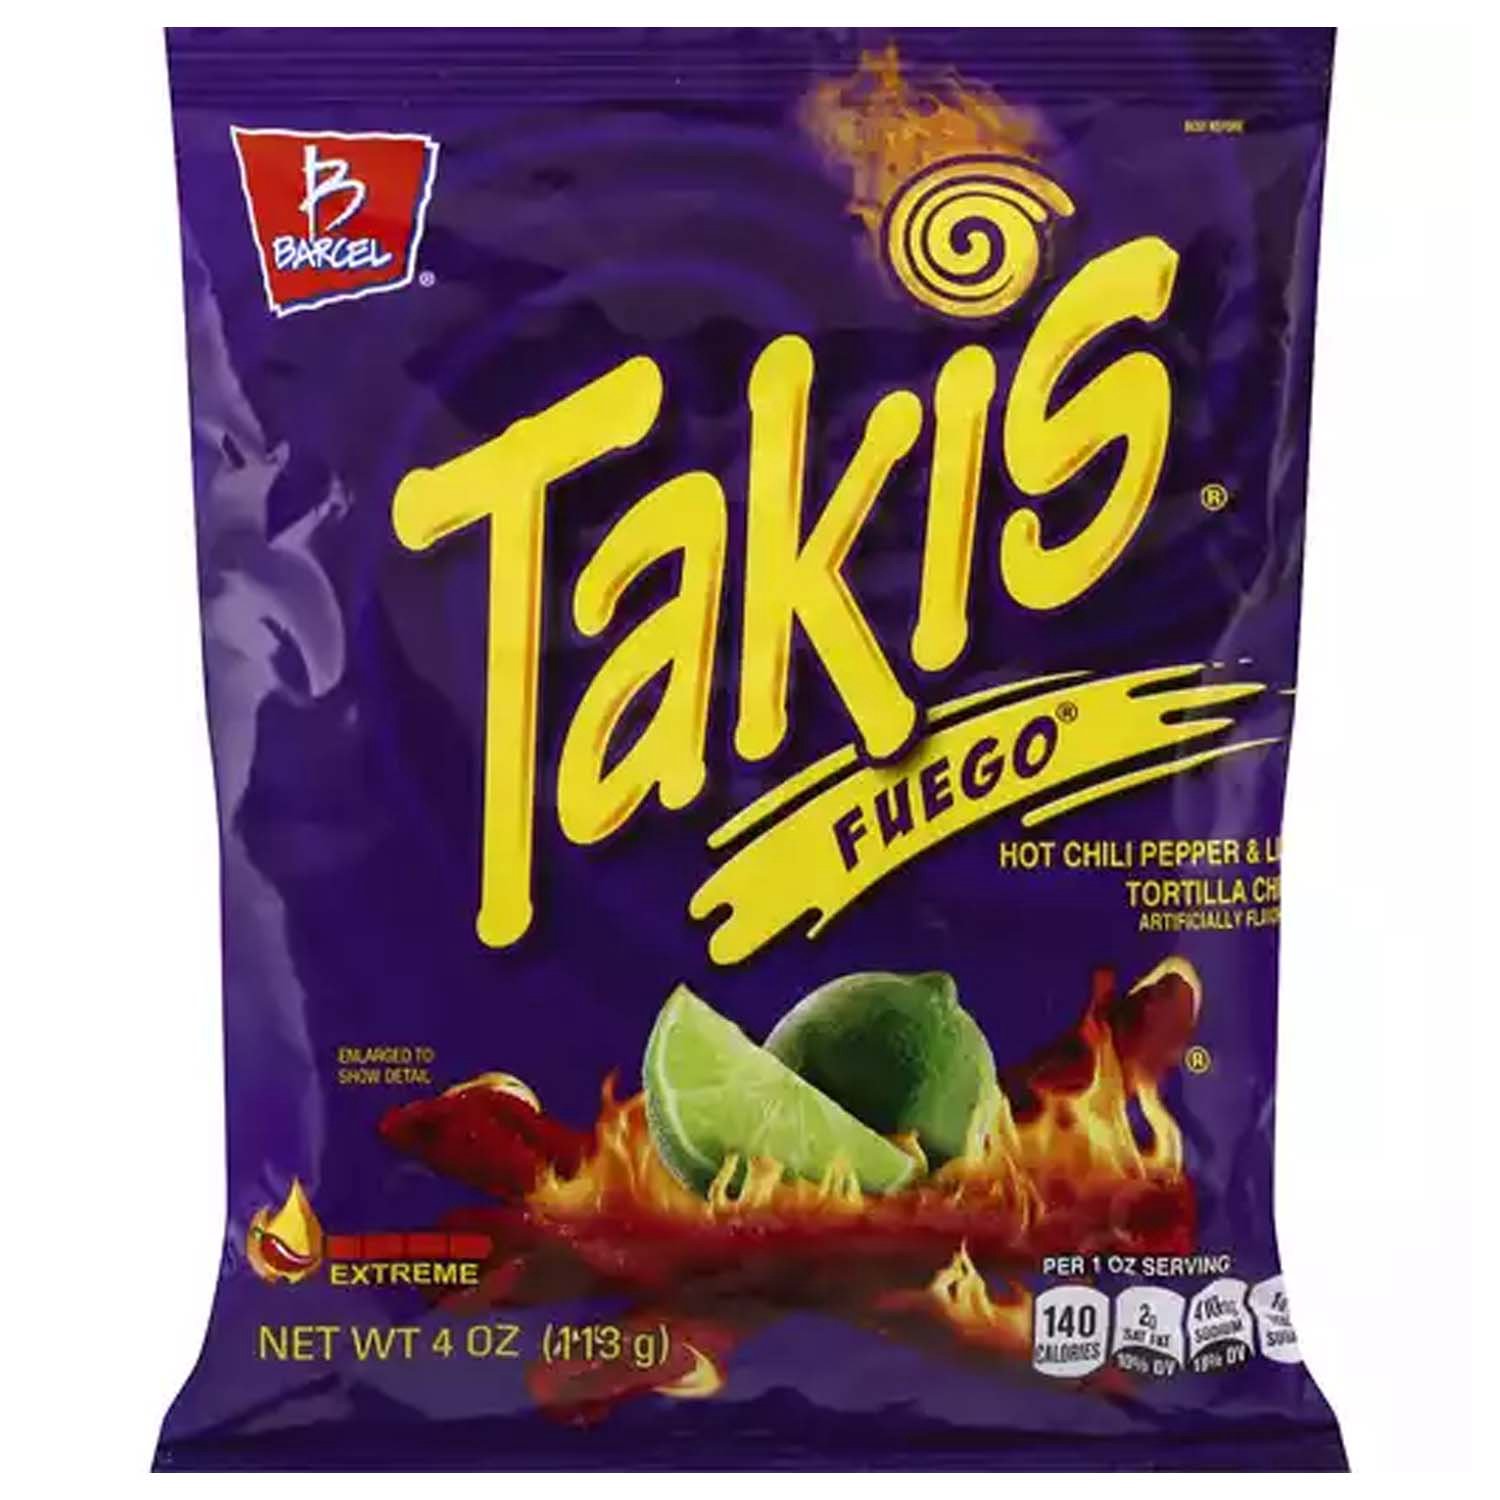 Chips - Takis Fuego  Archie's Hot Dog Island & Catering LLC